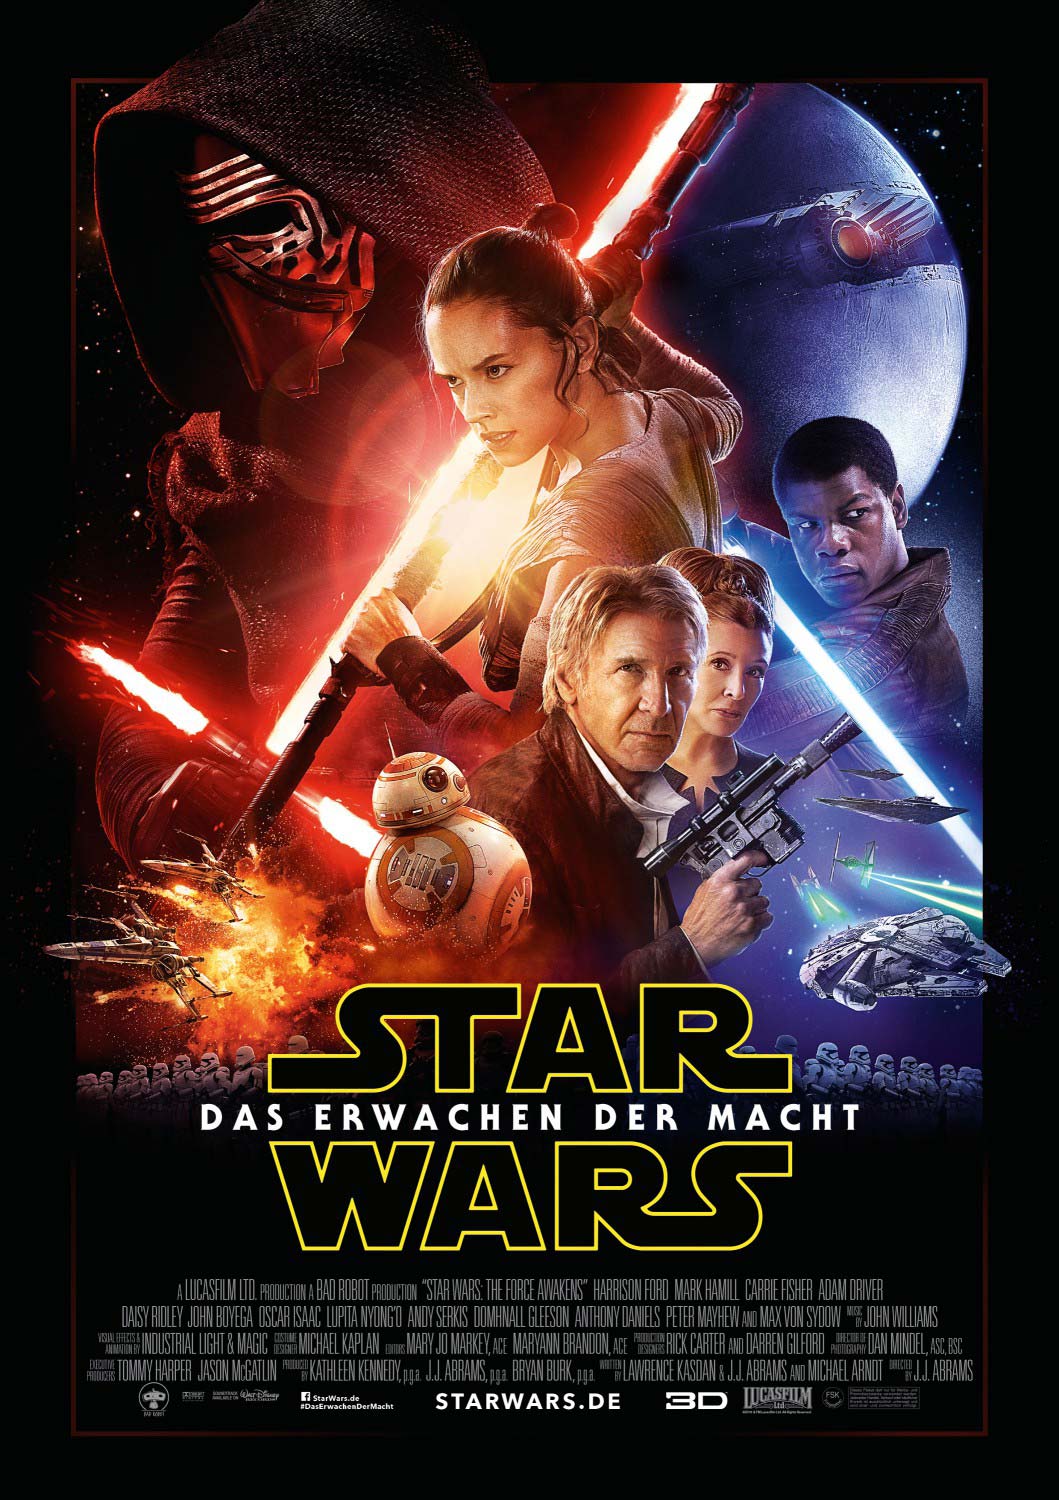 Raap JEP bespotten Star Wars: The Force Awakens" International and Character Posters Revealed  | Know It All Joe